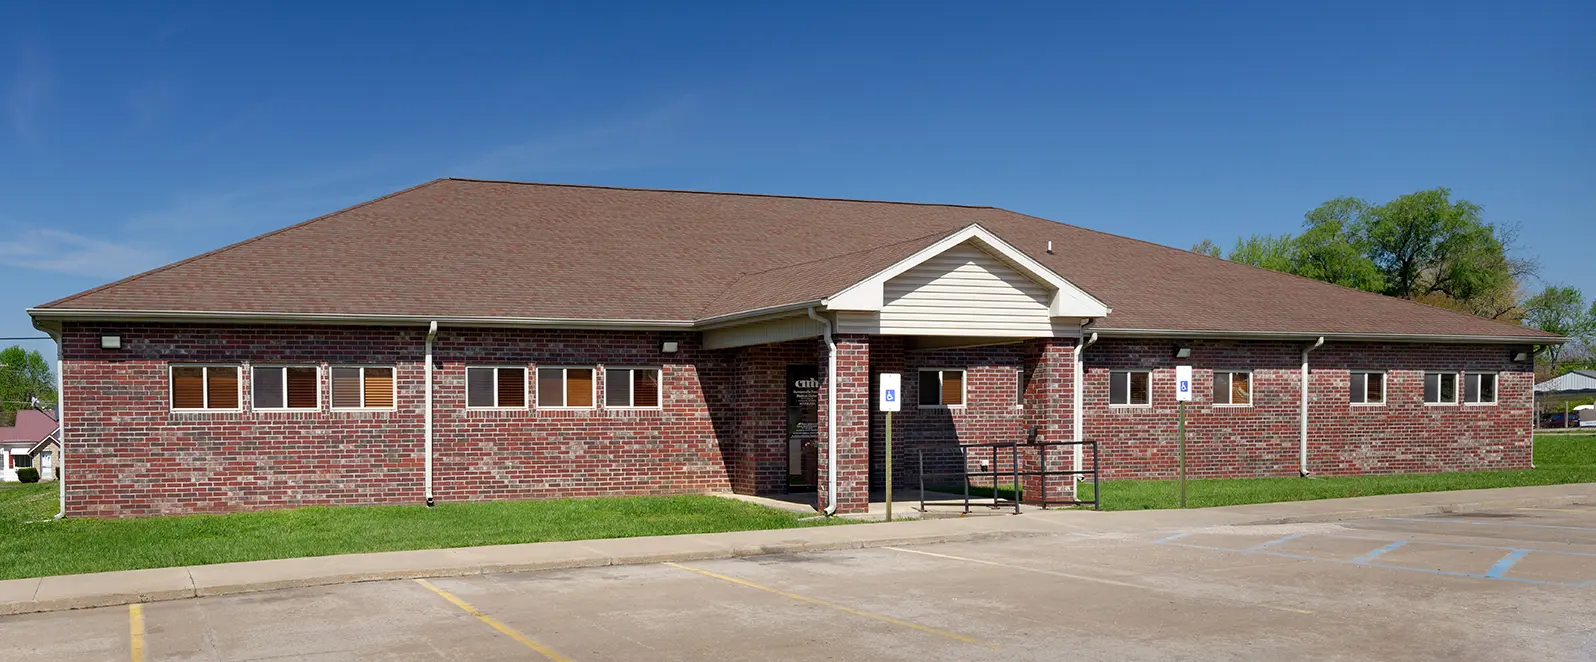 Humansville Family Medical Center building exterior